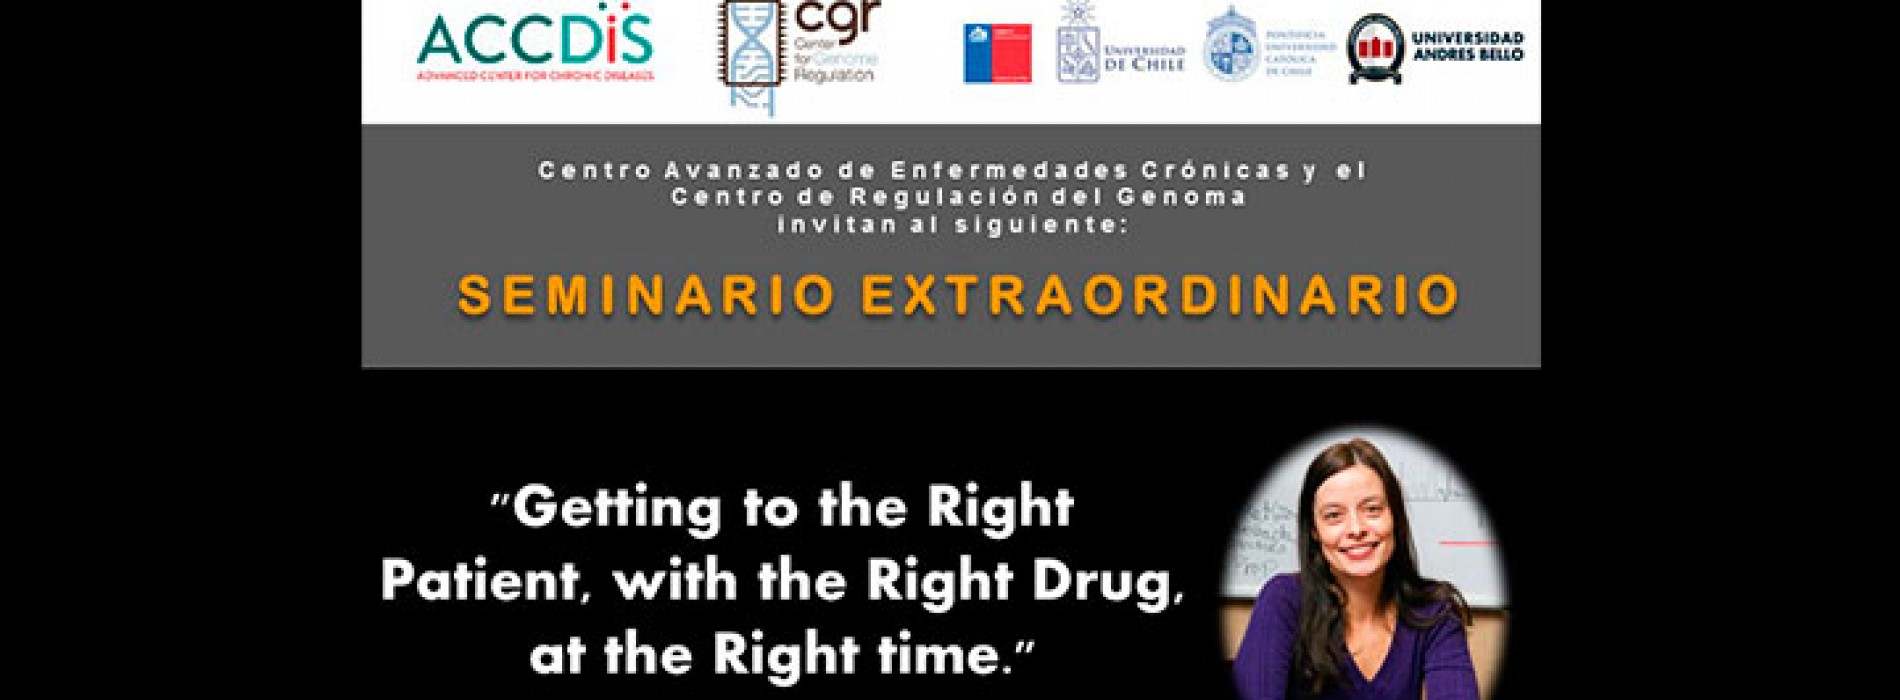 Seminario ACCDiS-CRG: “Getting to the Right Patient, with the Right Drug, at the Right time”, Kenna R. Mills Shaw, Ph.D